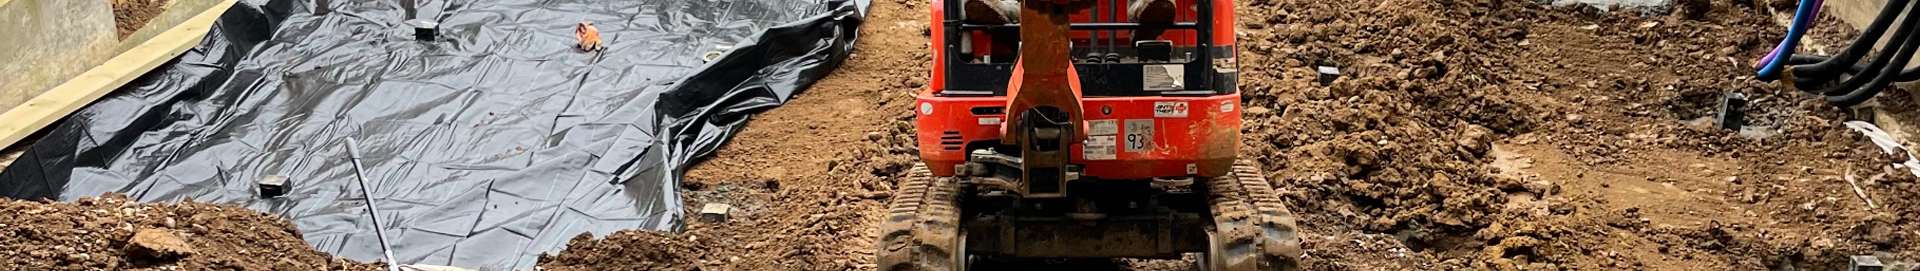 Piling & Groundworks Services London